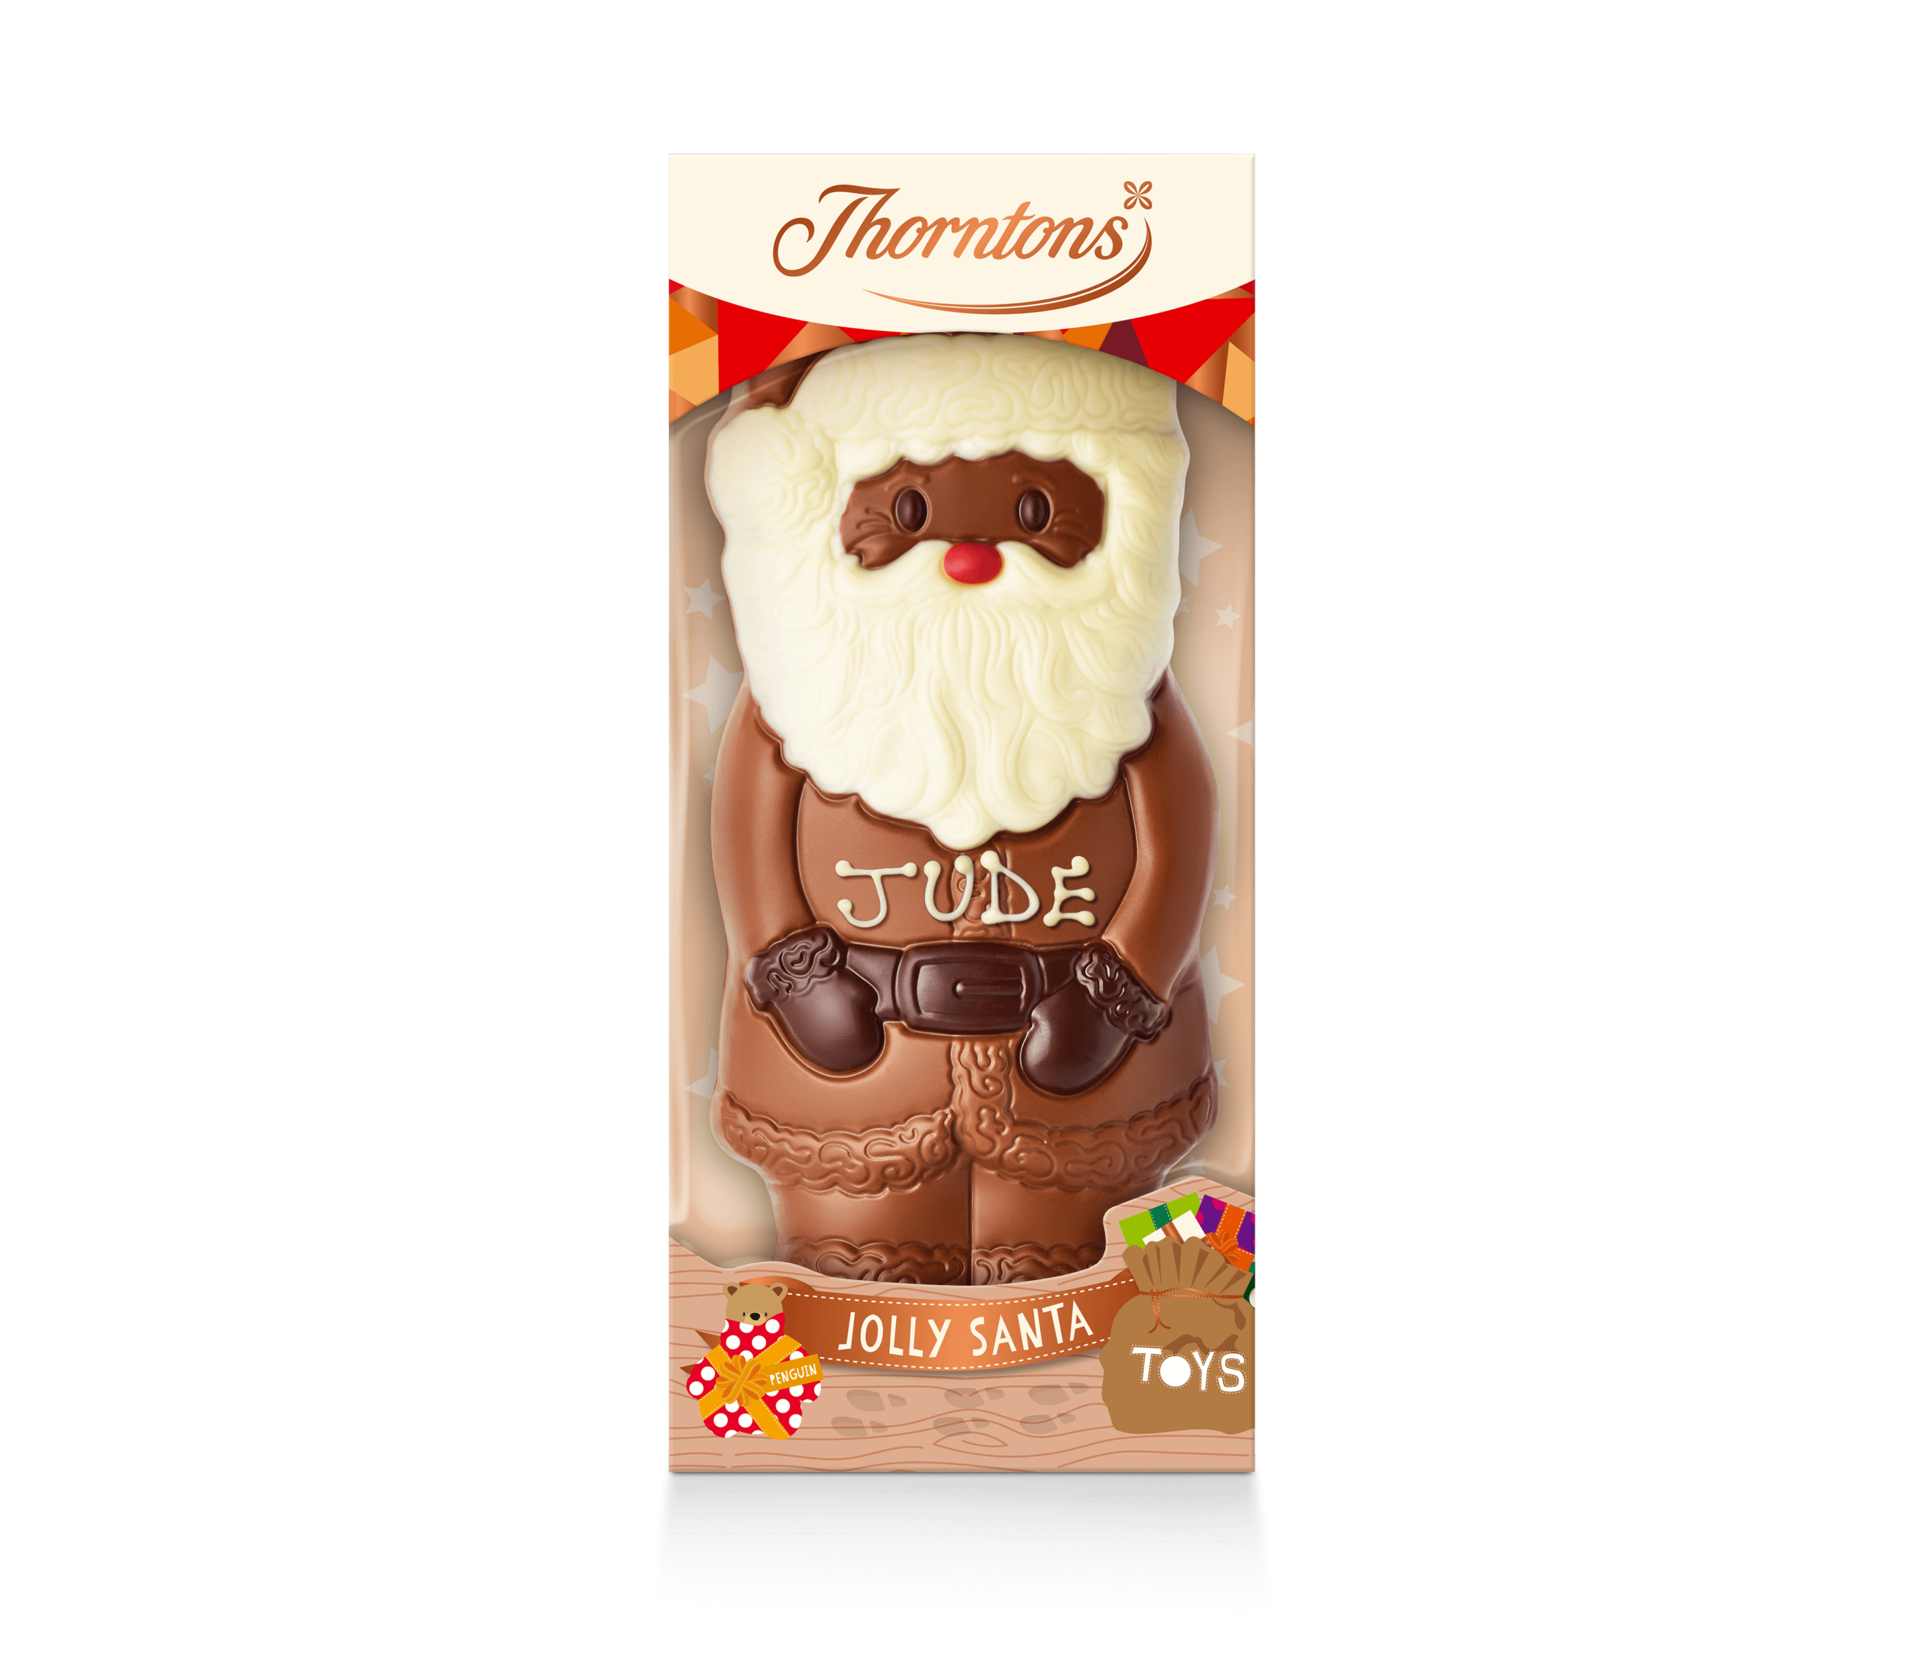 https://www.thorntons.com/medias/sys_master/images/h81/h6a/10543677702174/77233261_main/77233261-main.png?resize=xs-s-xs